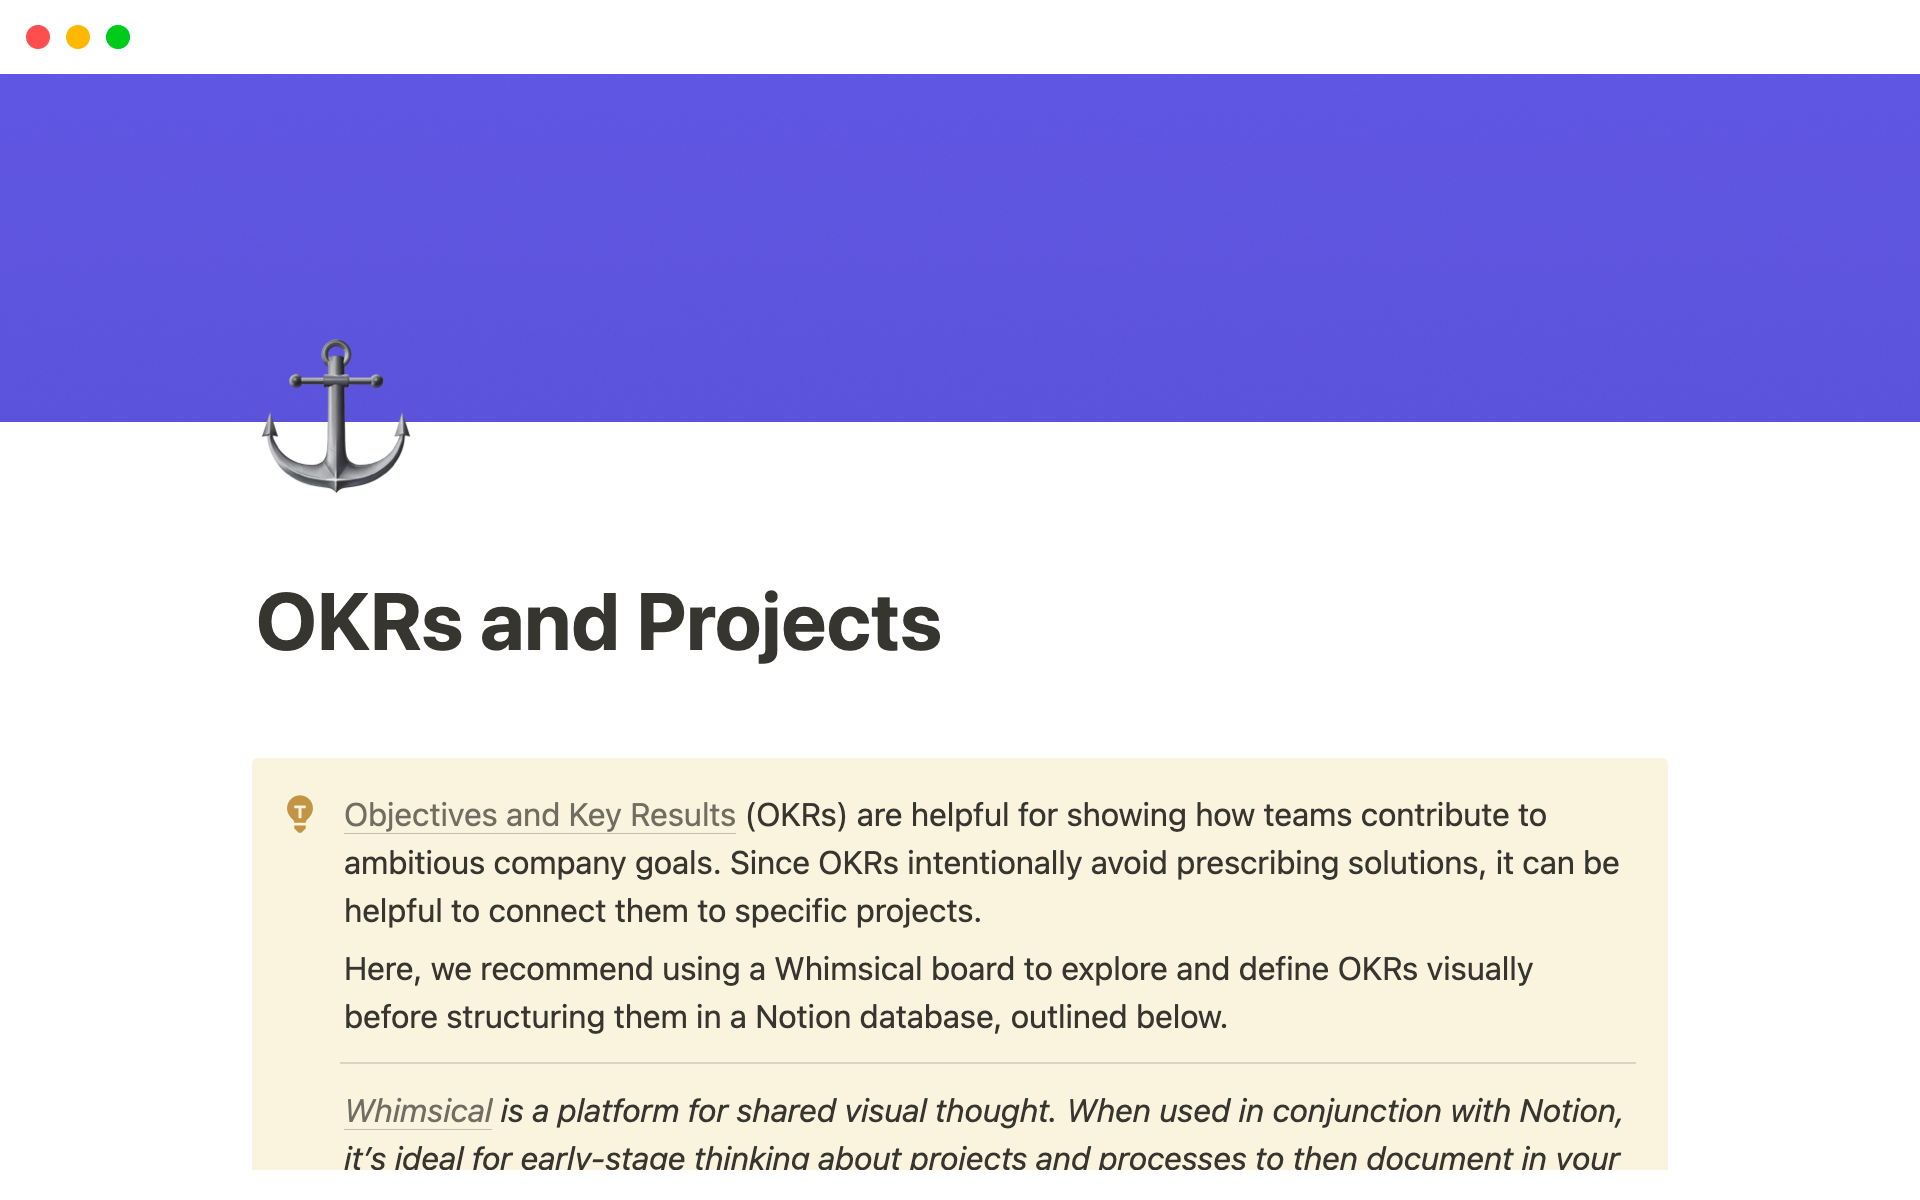 The OKRs and Projects template supports generation of OKRs as well as alignment with projects to achieve company goals.